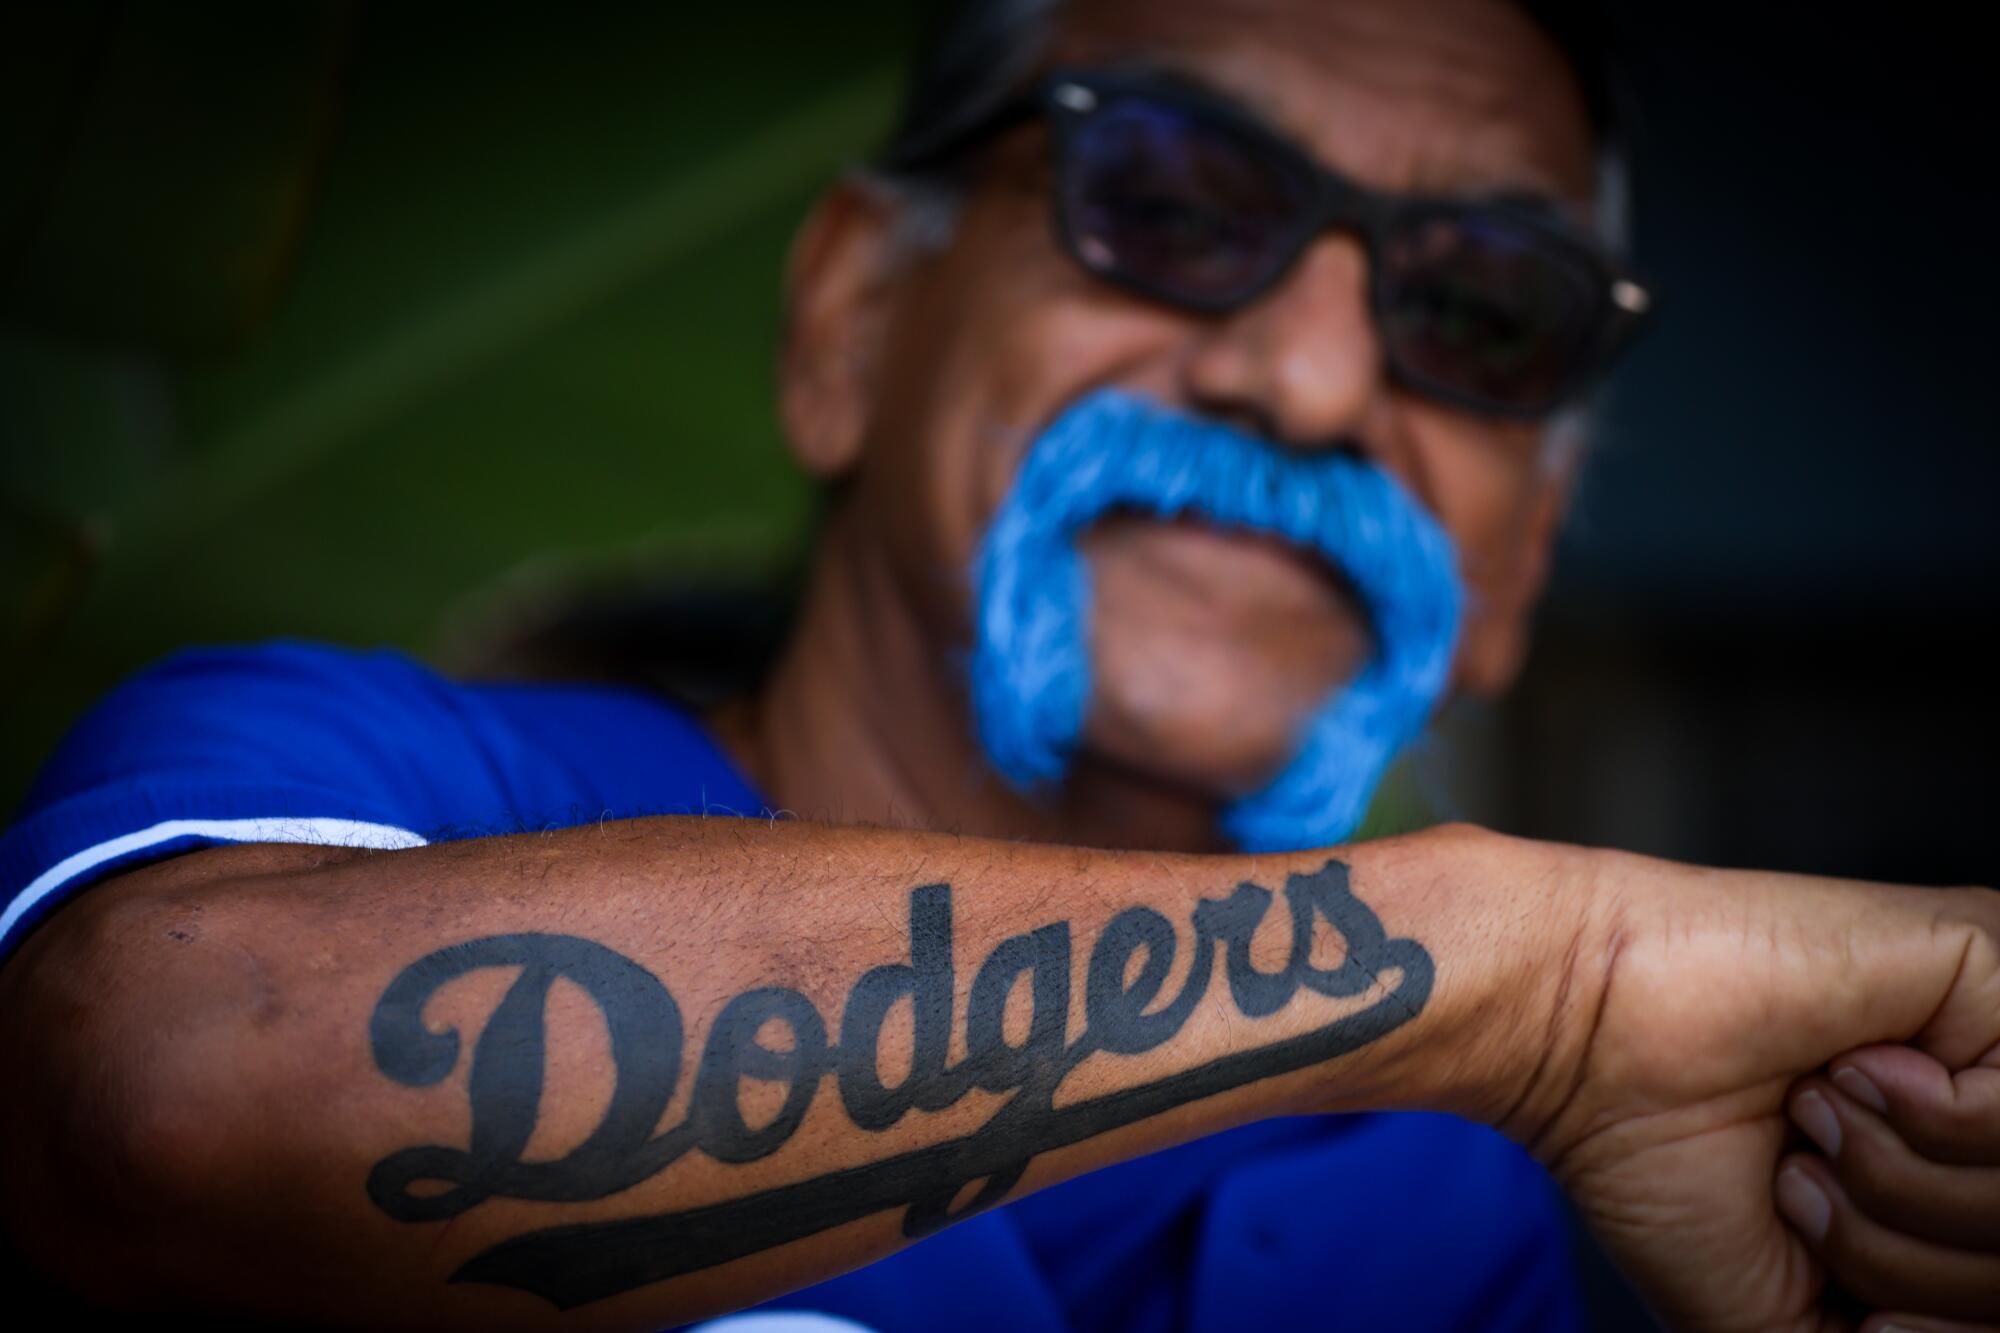 Arte Navarrete shows off his Dodgers tattoo before the game.